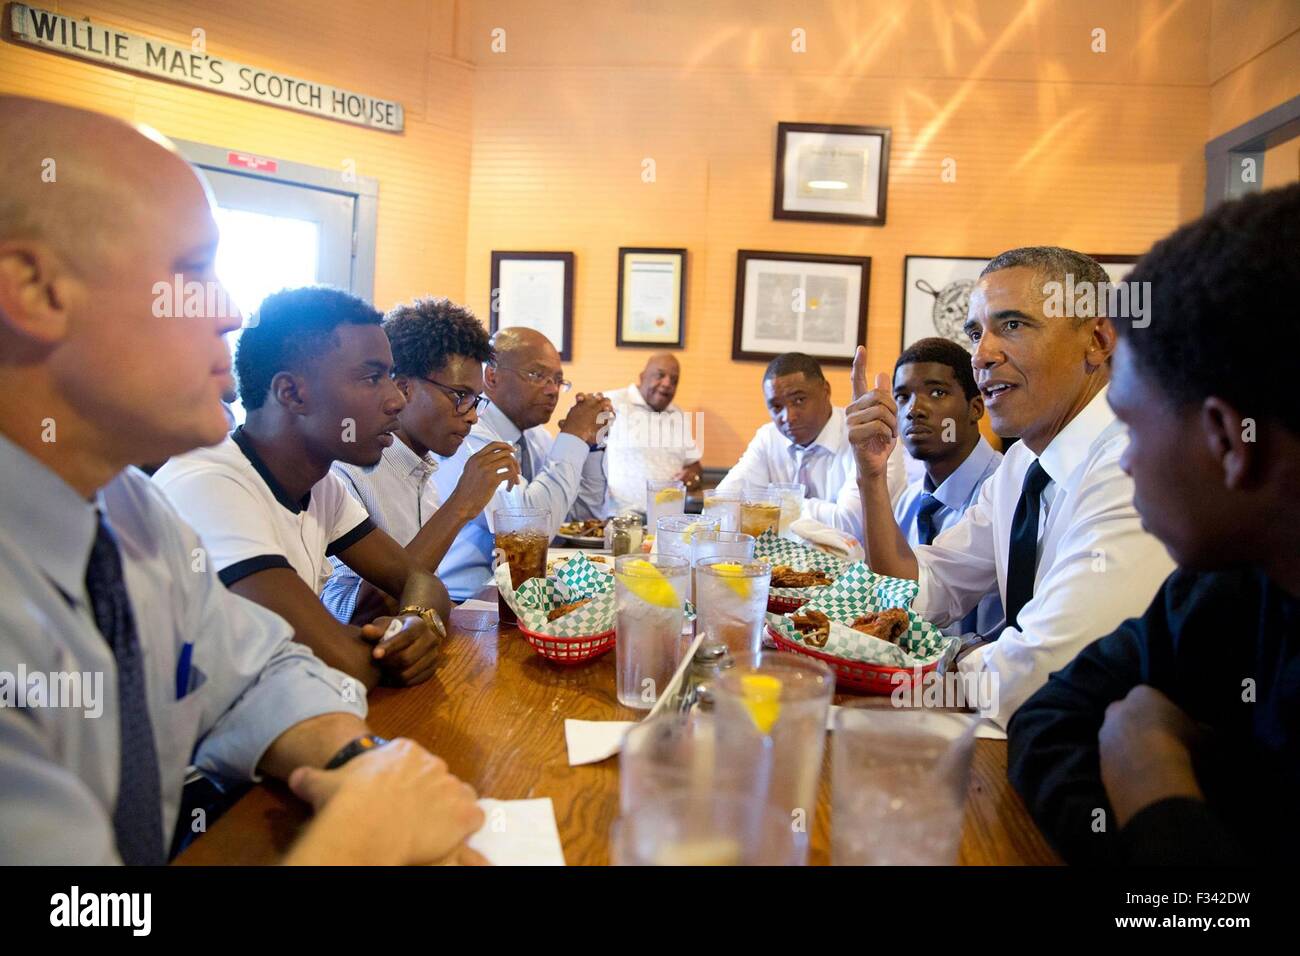 U.S. President Barack Obama talks with young men during a lunch stop with them at Willie Mae's Scotch House August 27, 2015 in New Orleans, Louisiana. The president is visiting New Orleans to mark the tenth anniversary of Hurricane Katrina. Stock Photo